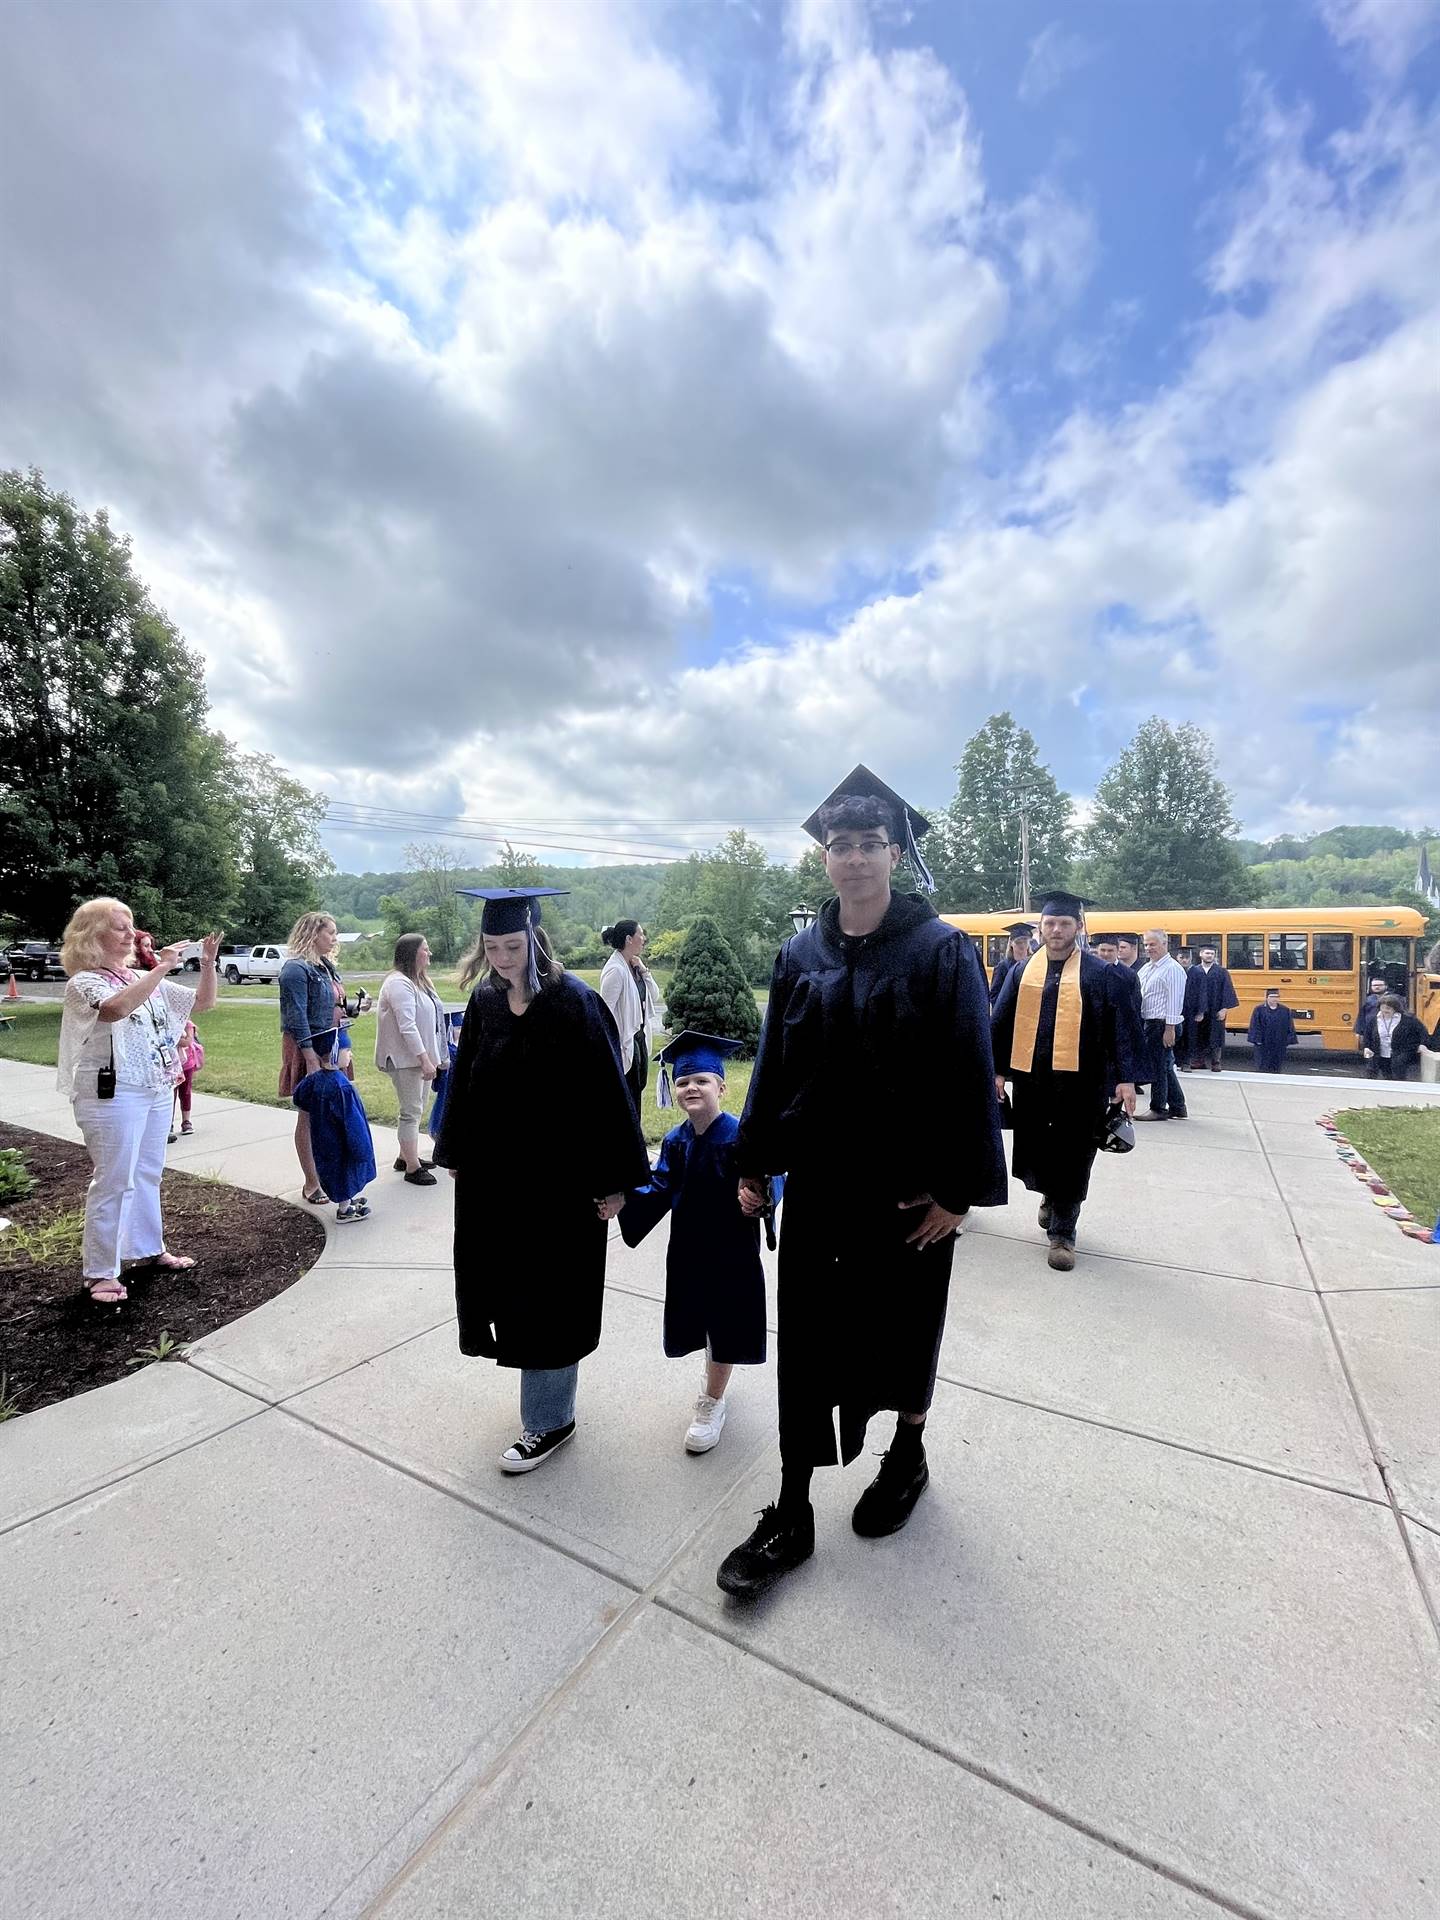 2 2023 senior graduates with a pre k student in middle dressed in caps and gowns